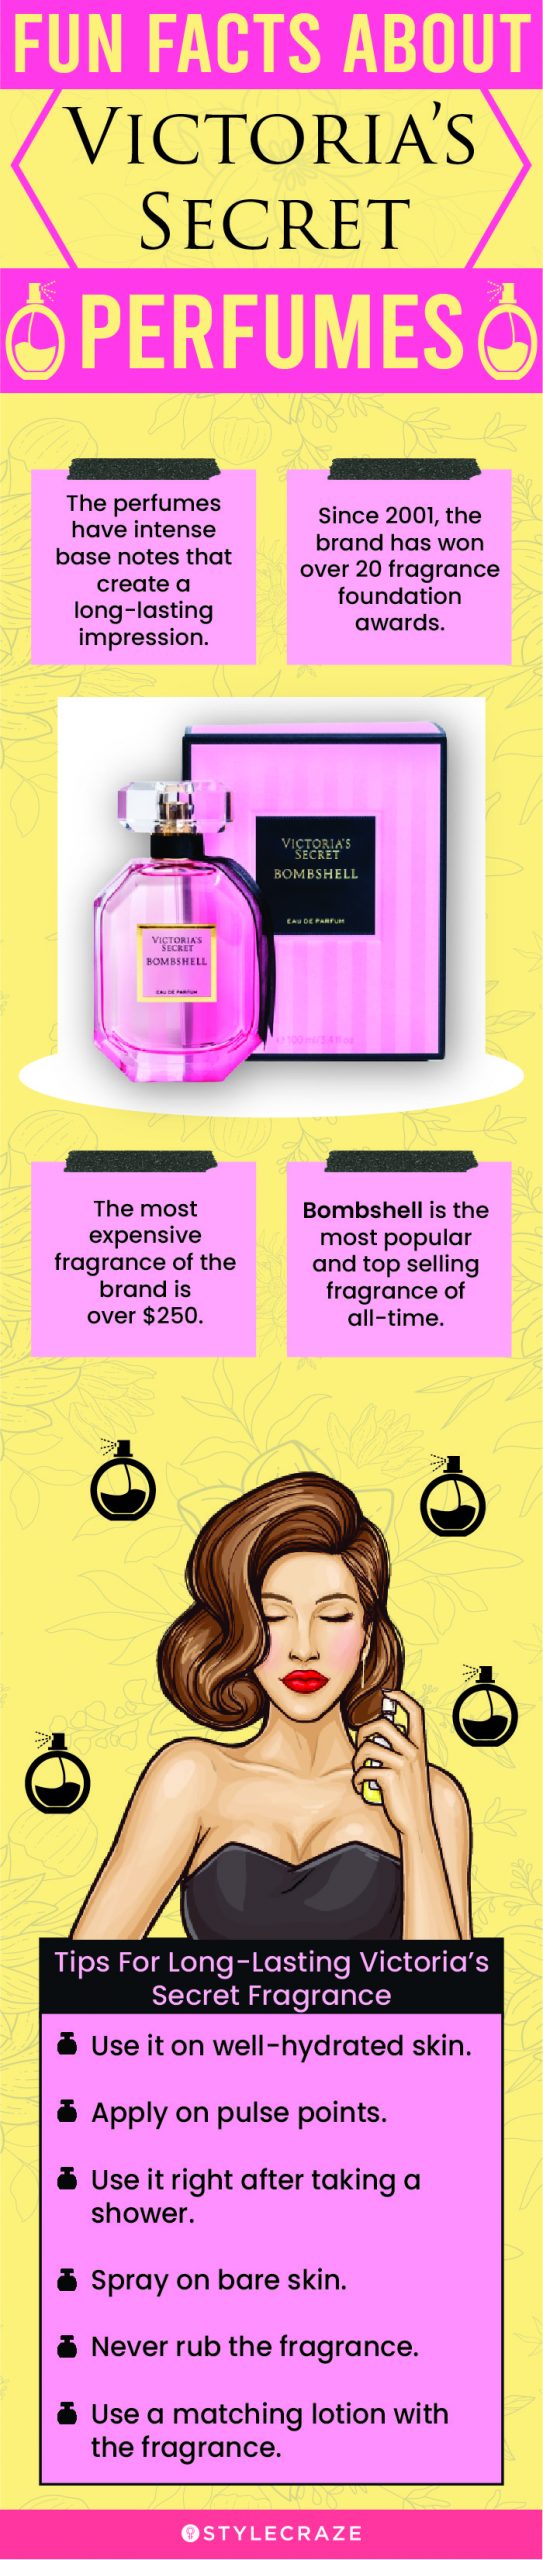 Fun Facts About Victoria's Secret Perfumes [infographic]